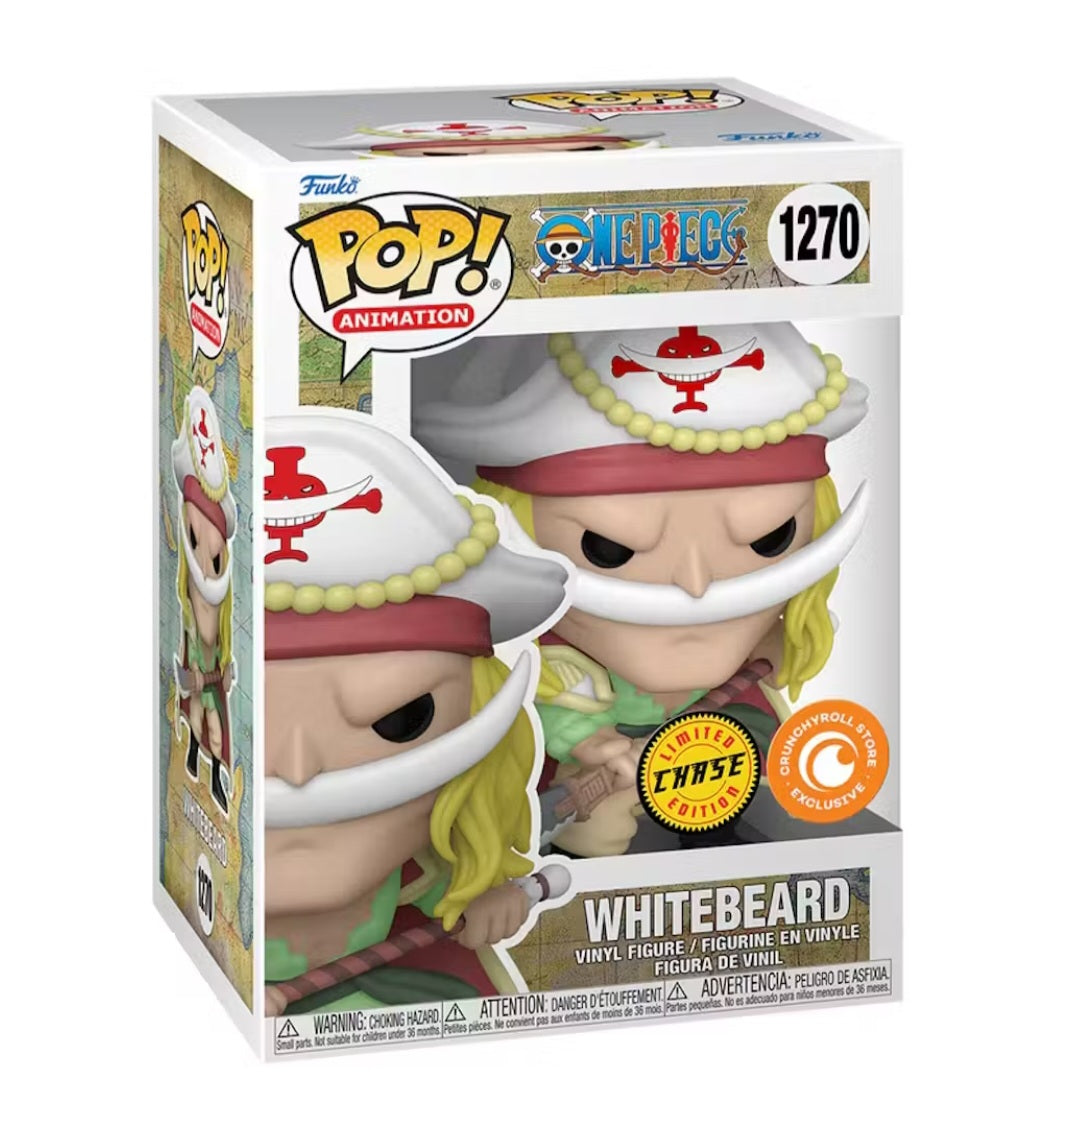 One Piece- White beard cr chase